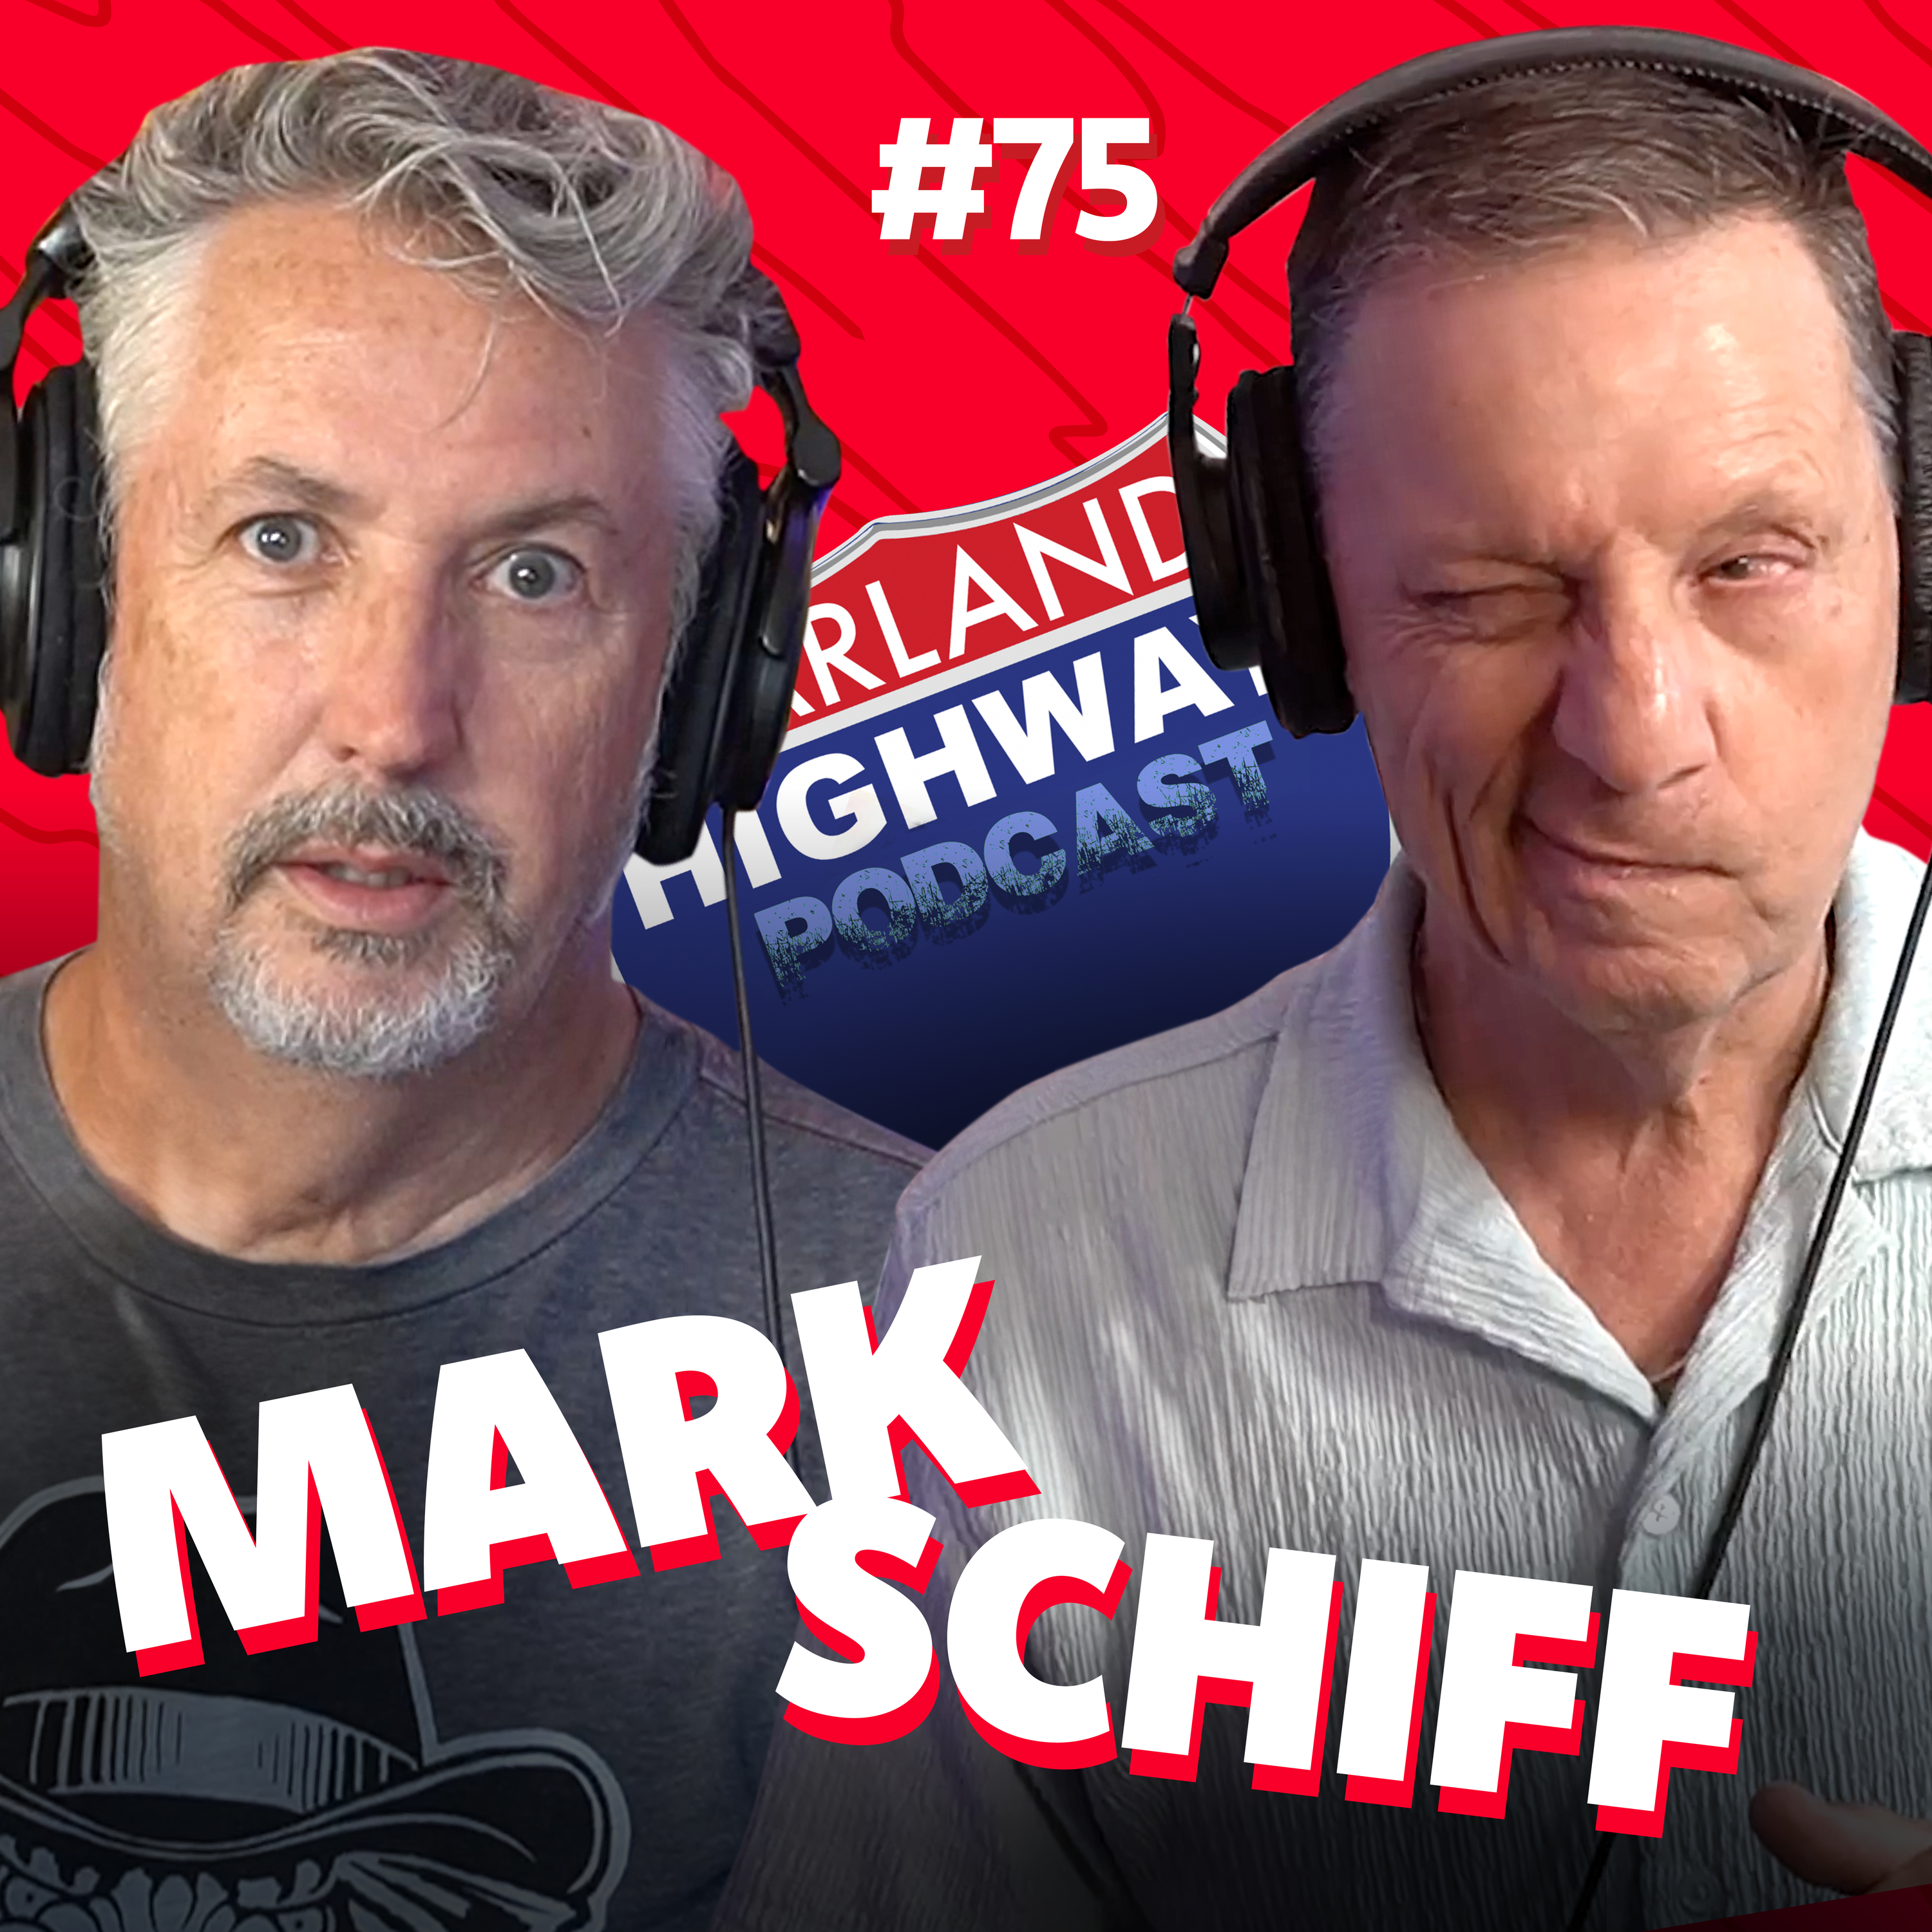 NEW HARLAND HIGHWAY #75 - MARK SCHIFF - Comedian, Actor, Writer - We talk SEINFELD, funhouses, lawsuits, and Hebrew!